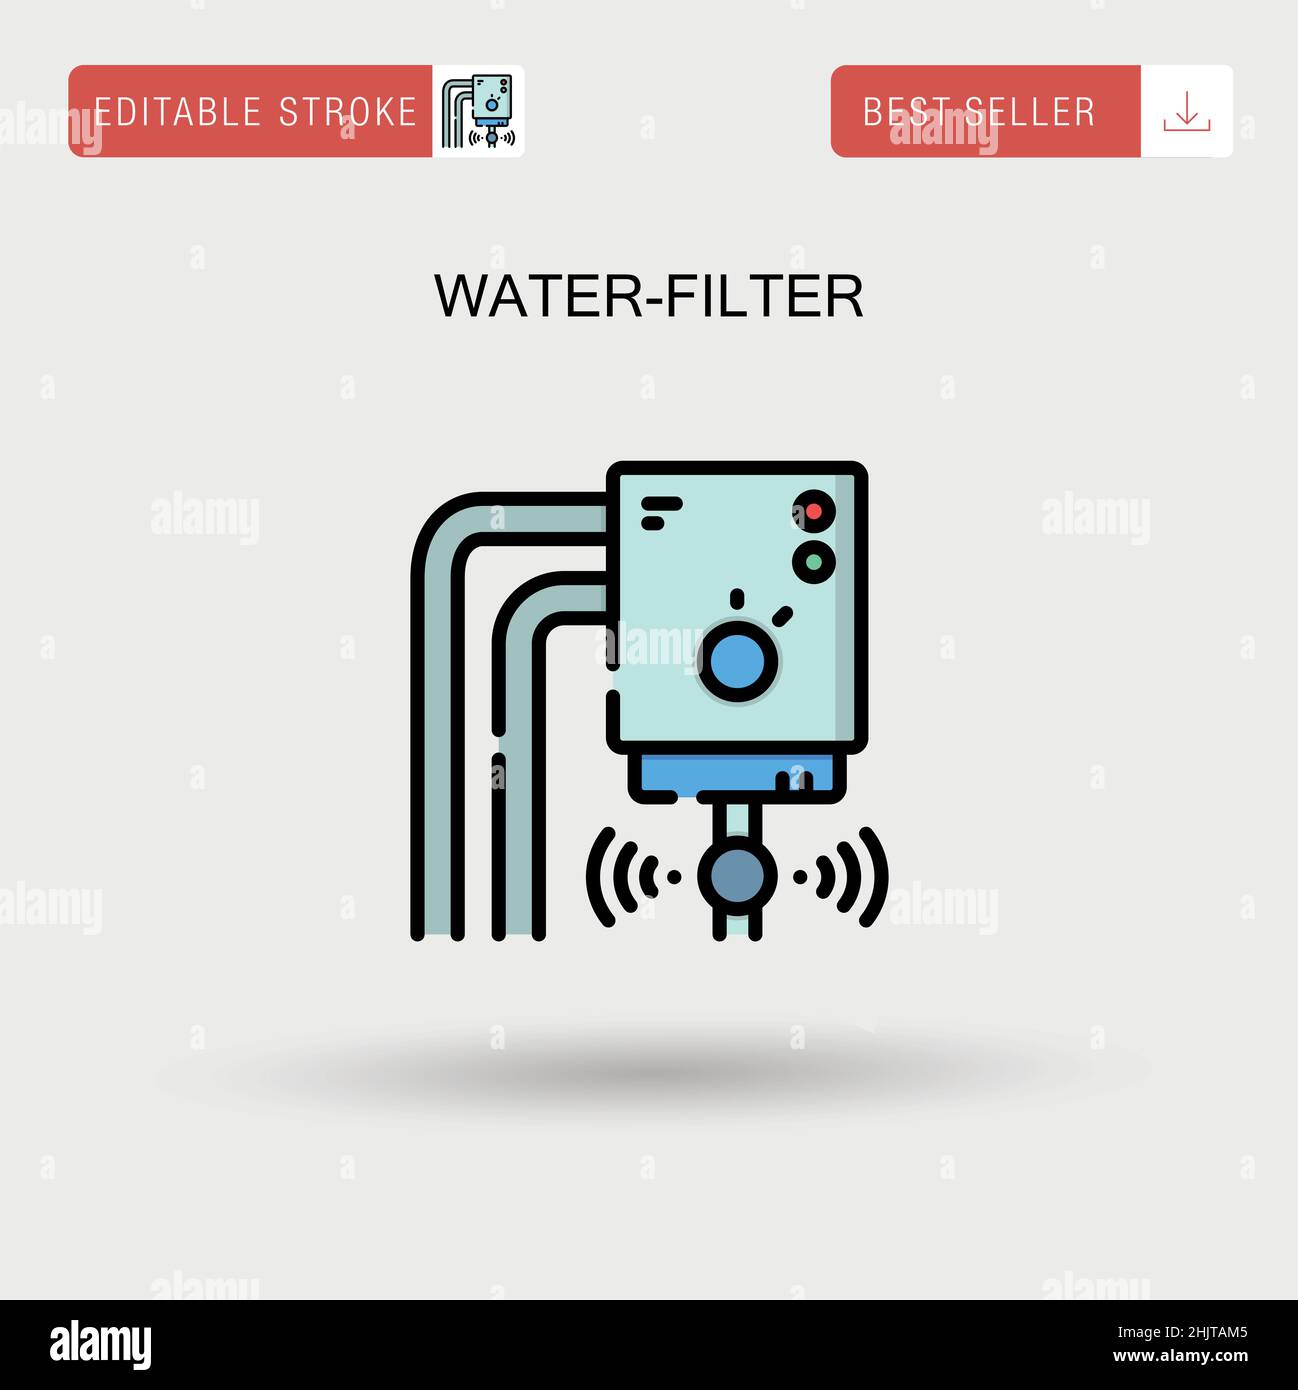 Water-filter Simple vector icon. Stock Vector